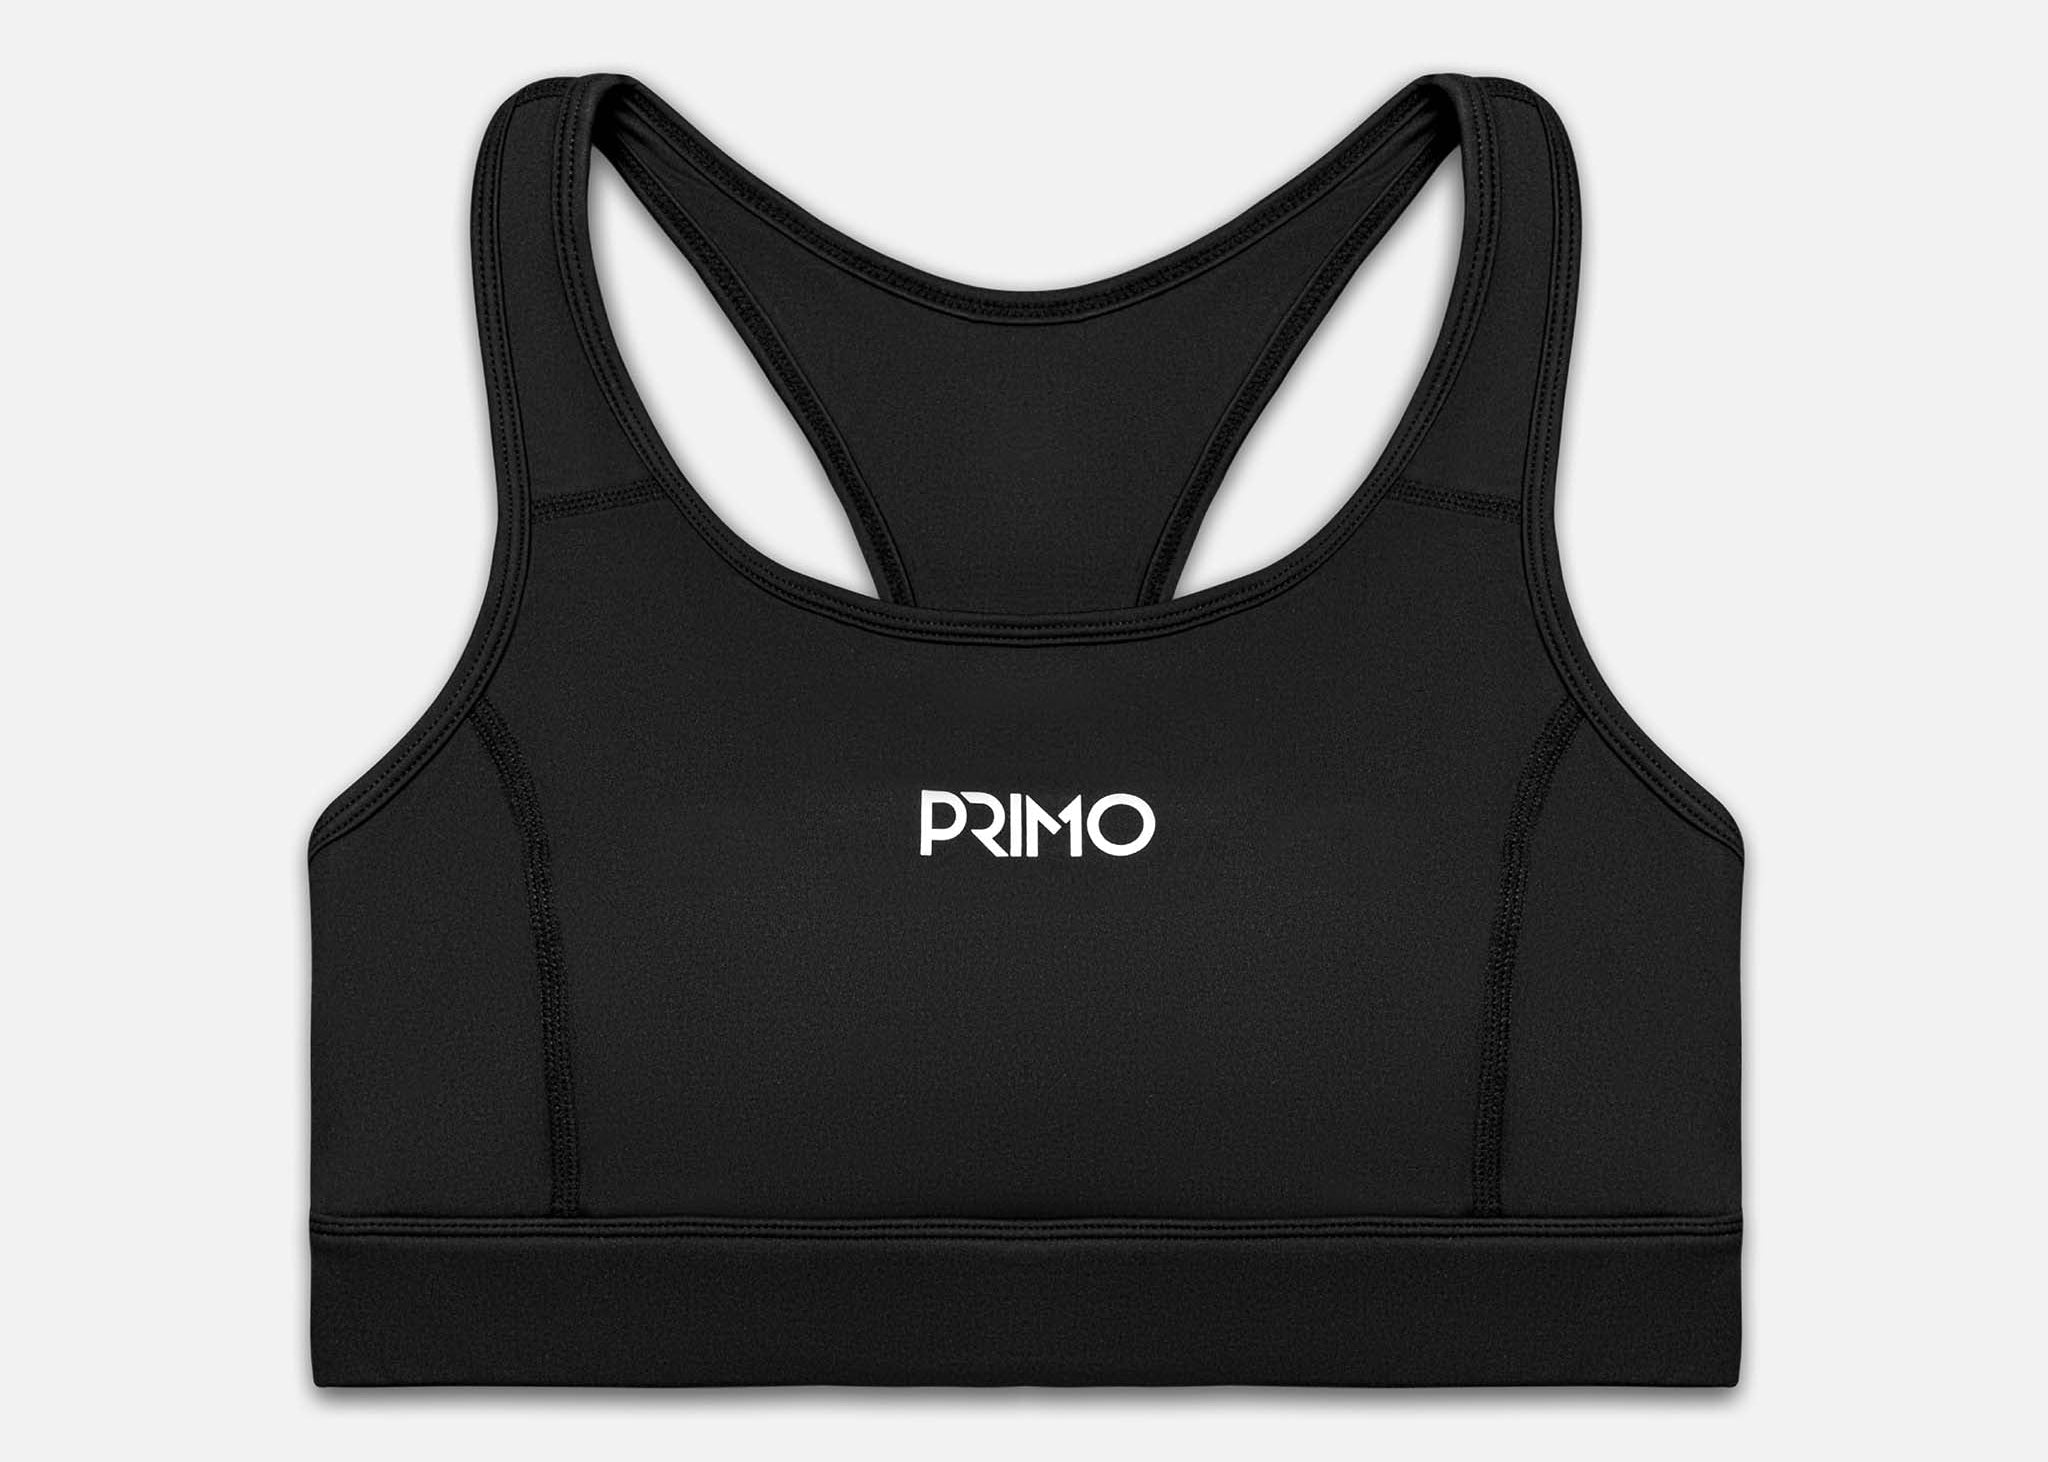 Primo Fight Wear Official Air Sports Bra - Black